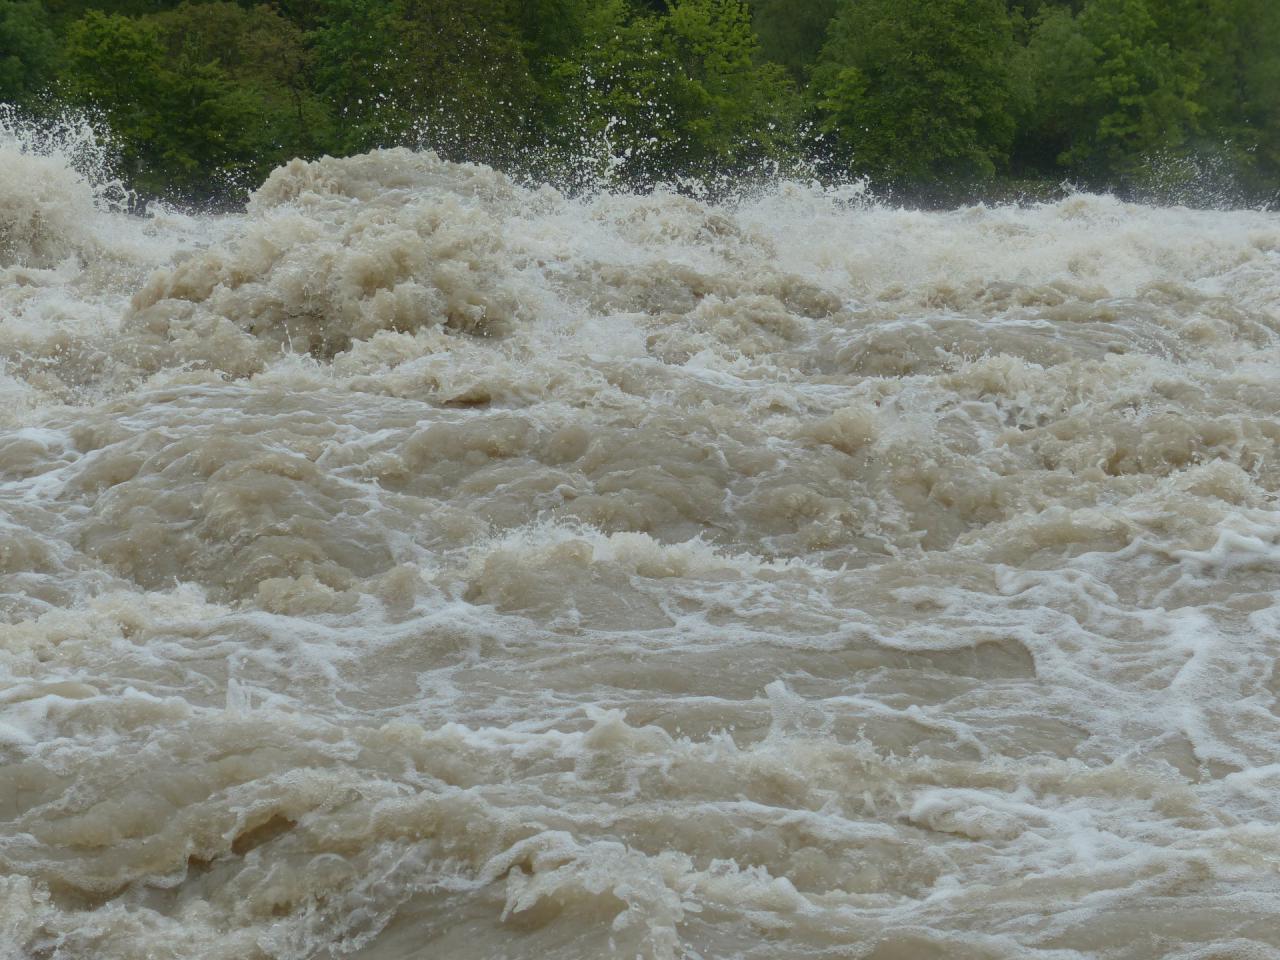 Image of high waters from Pixabay